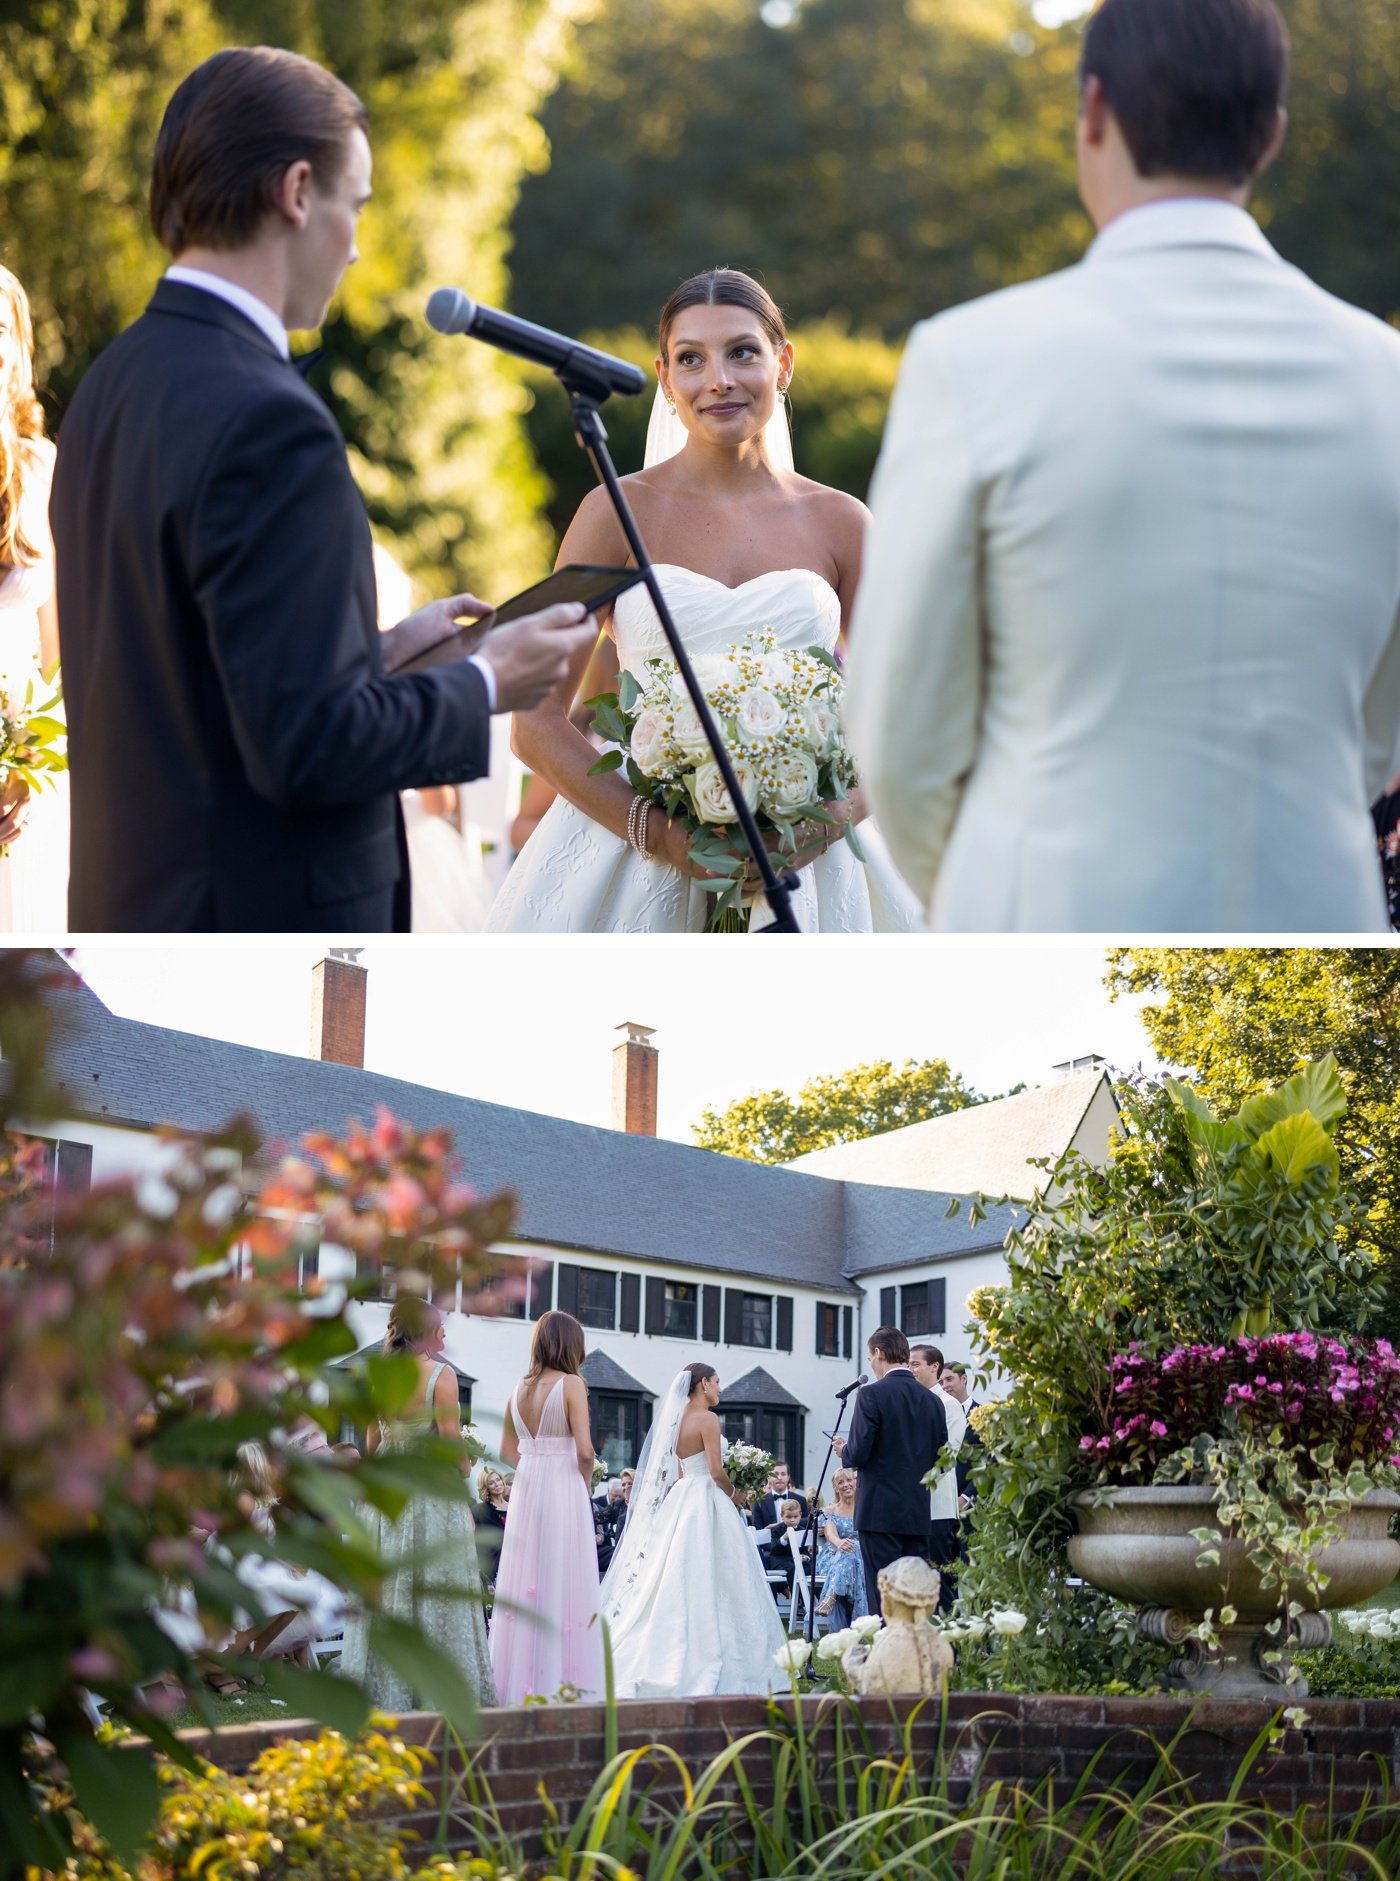 Outdoor wedding ceremony at Chelsea Mansion